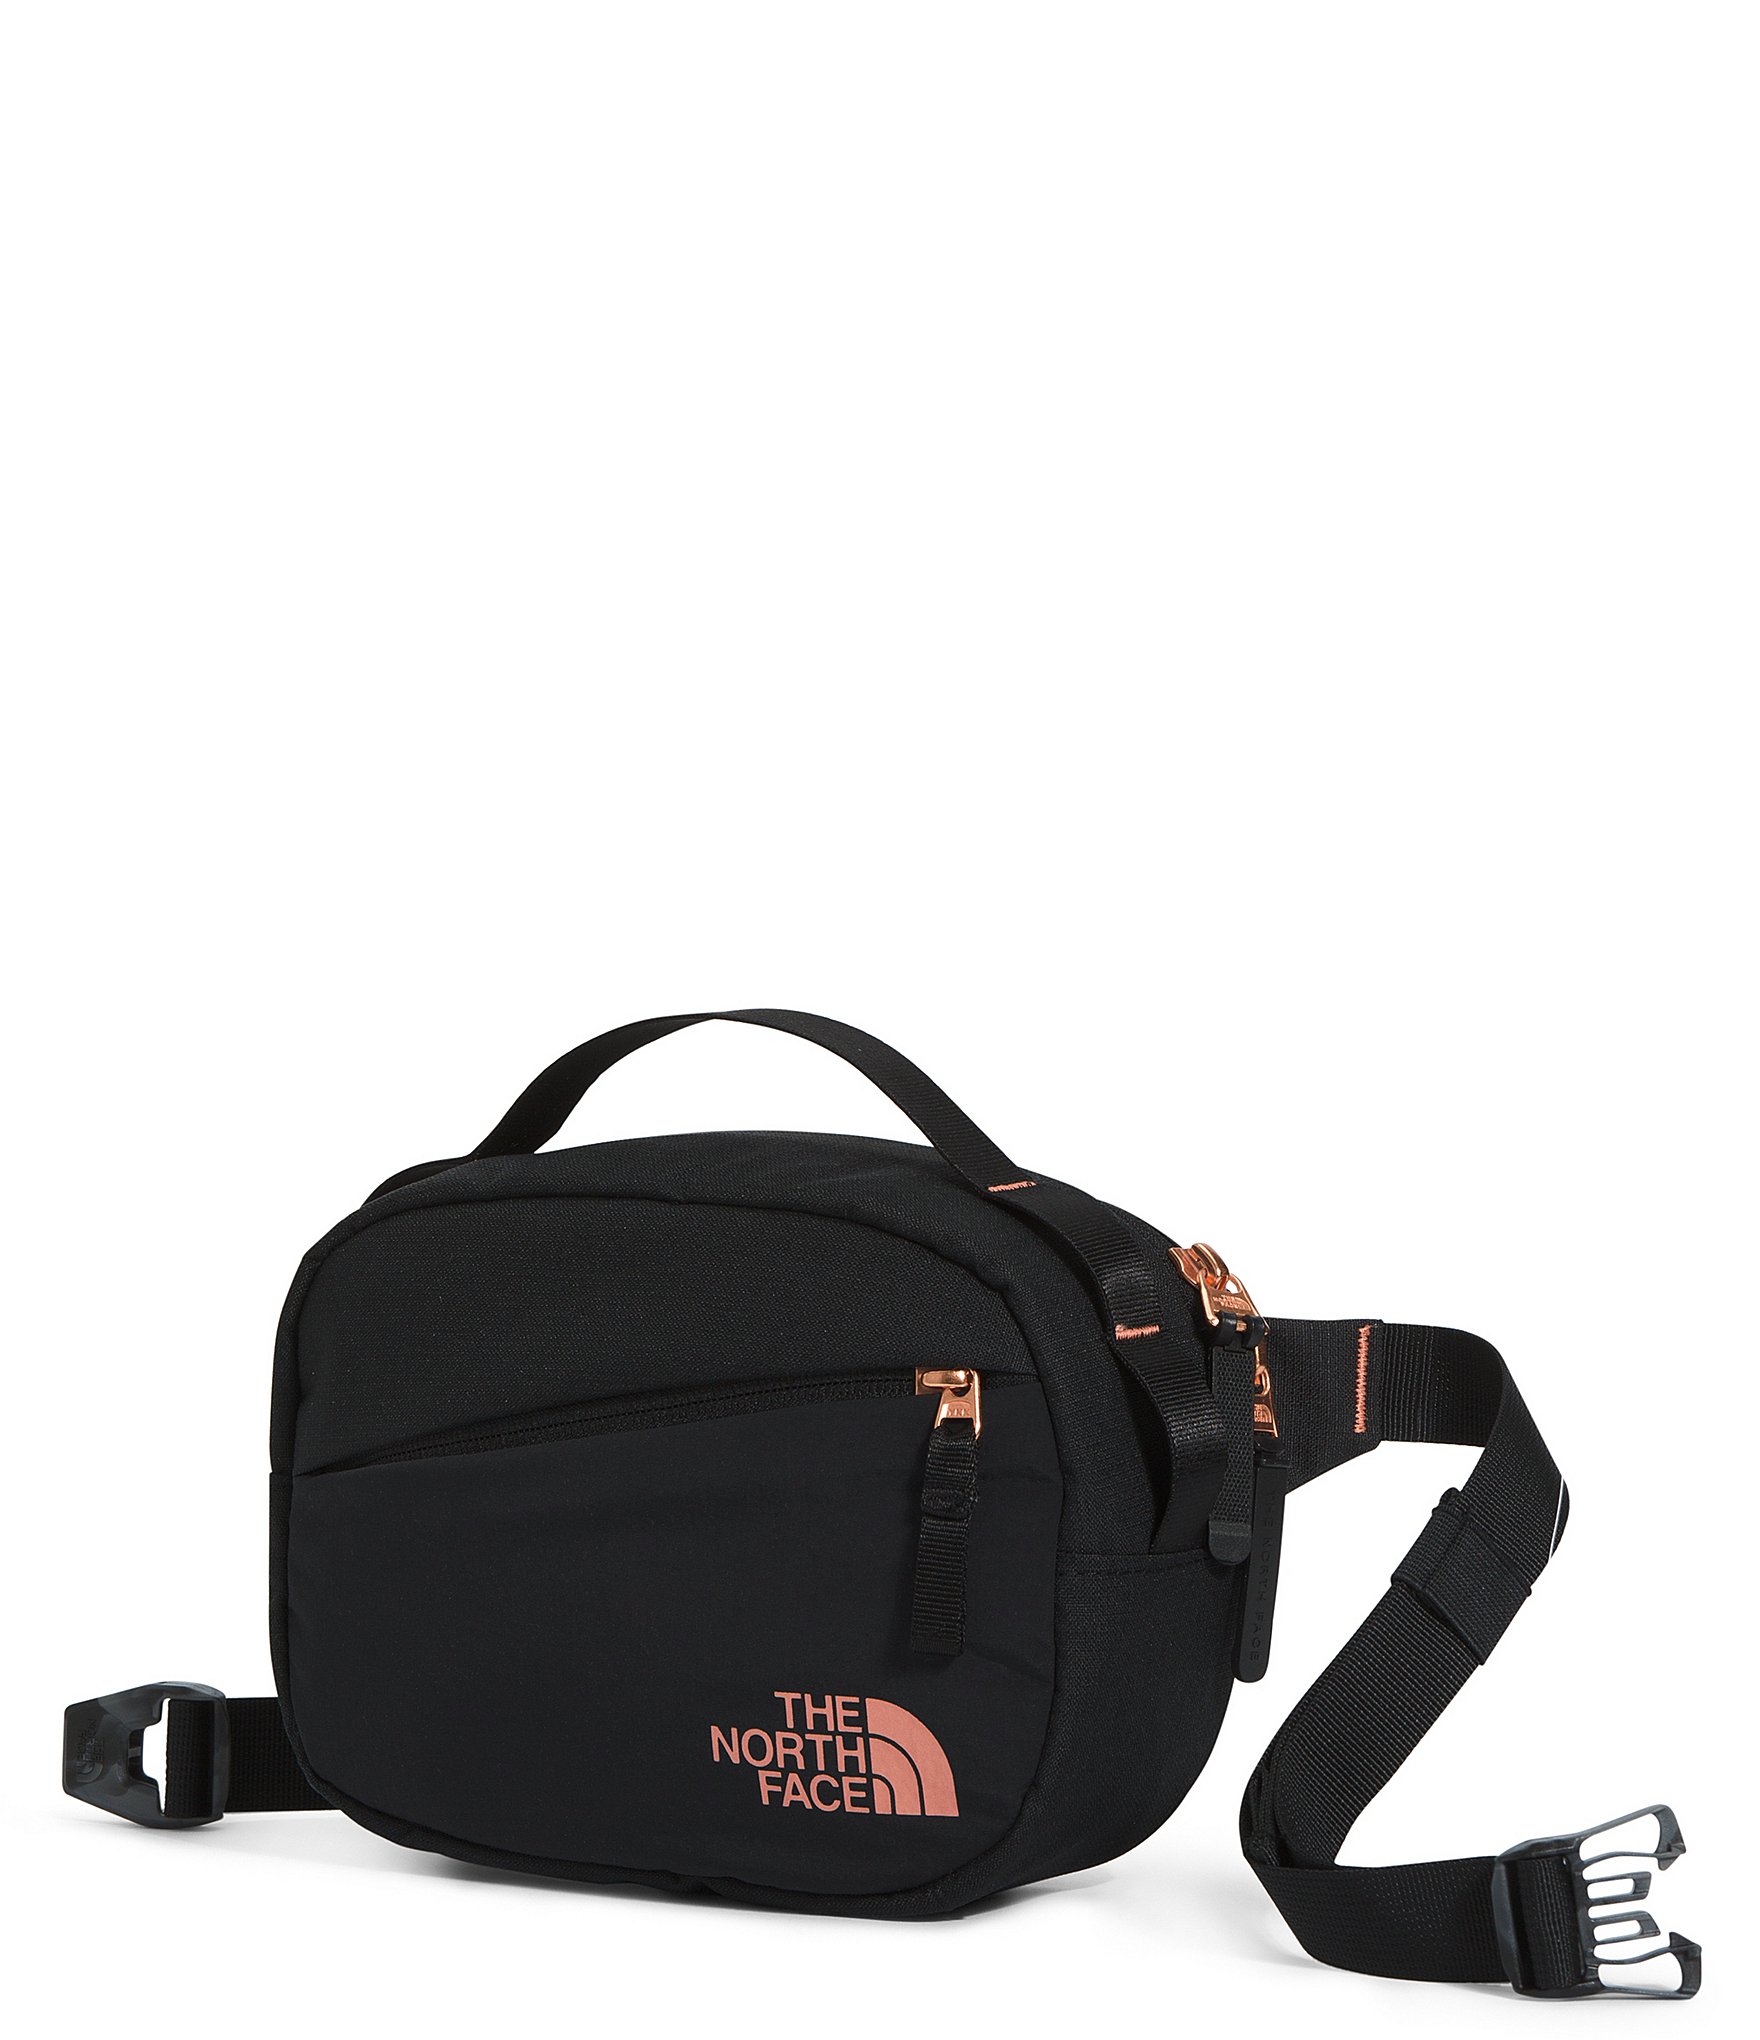 The North Face Field Bag — Mountain Sports